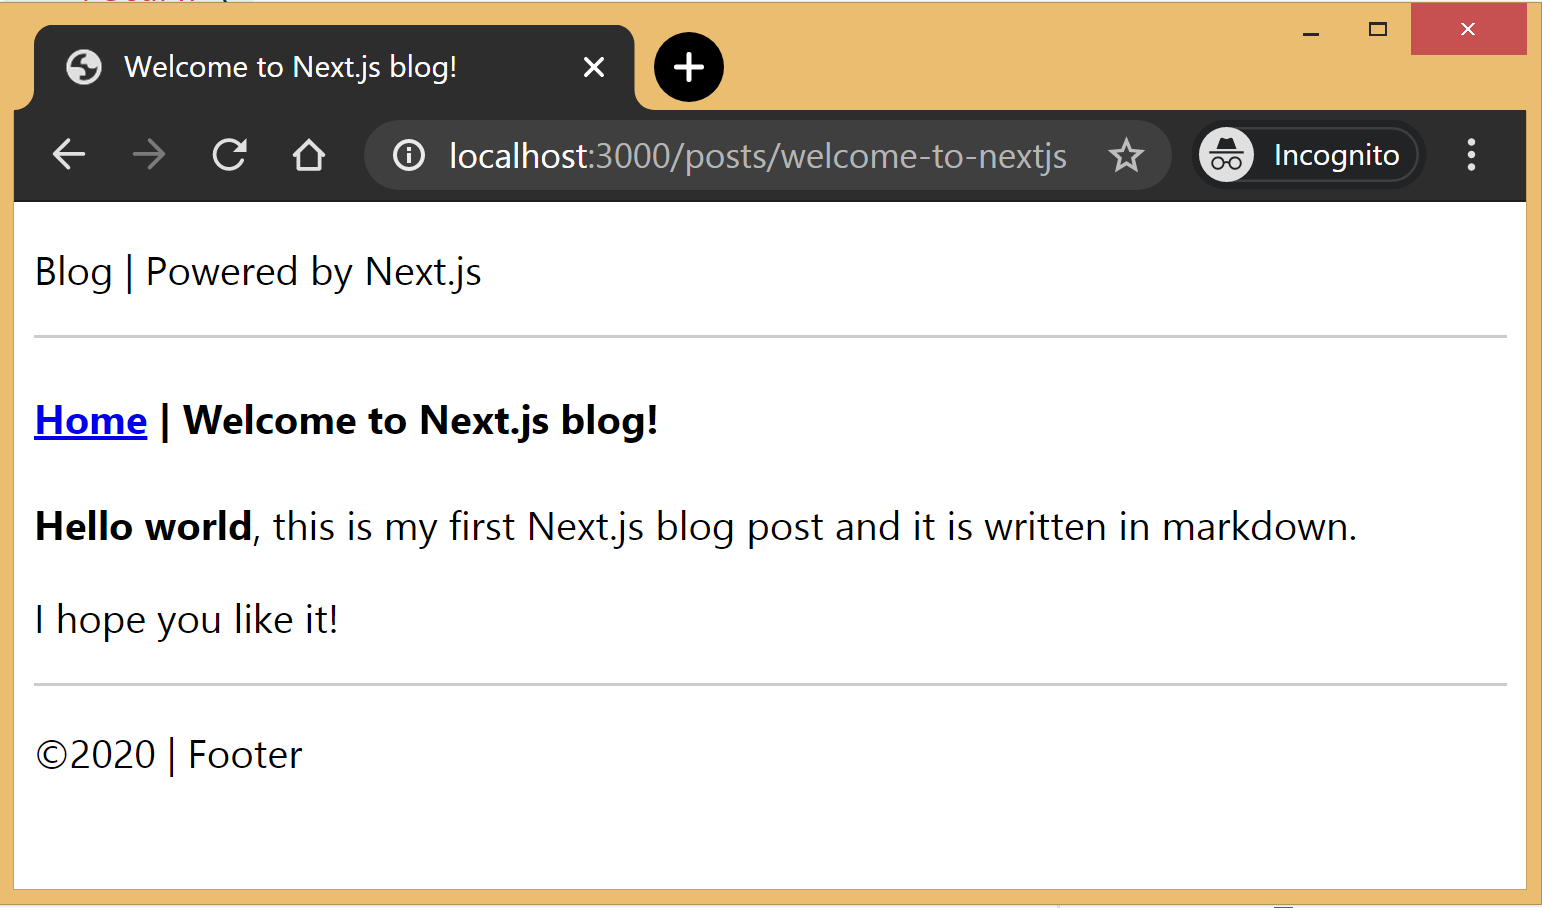 Screenshot of the blog page showing a welcome header and a hello world blue above the footer.